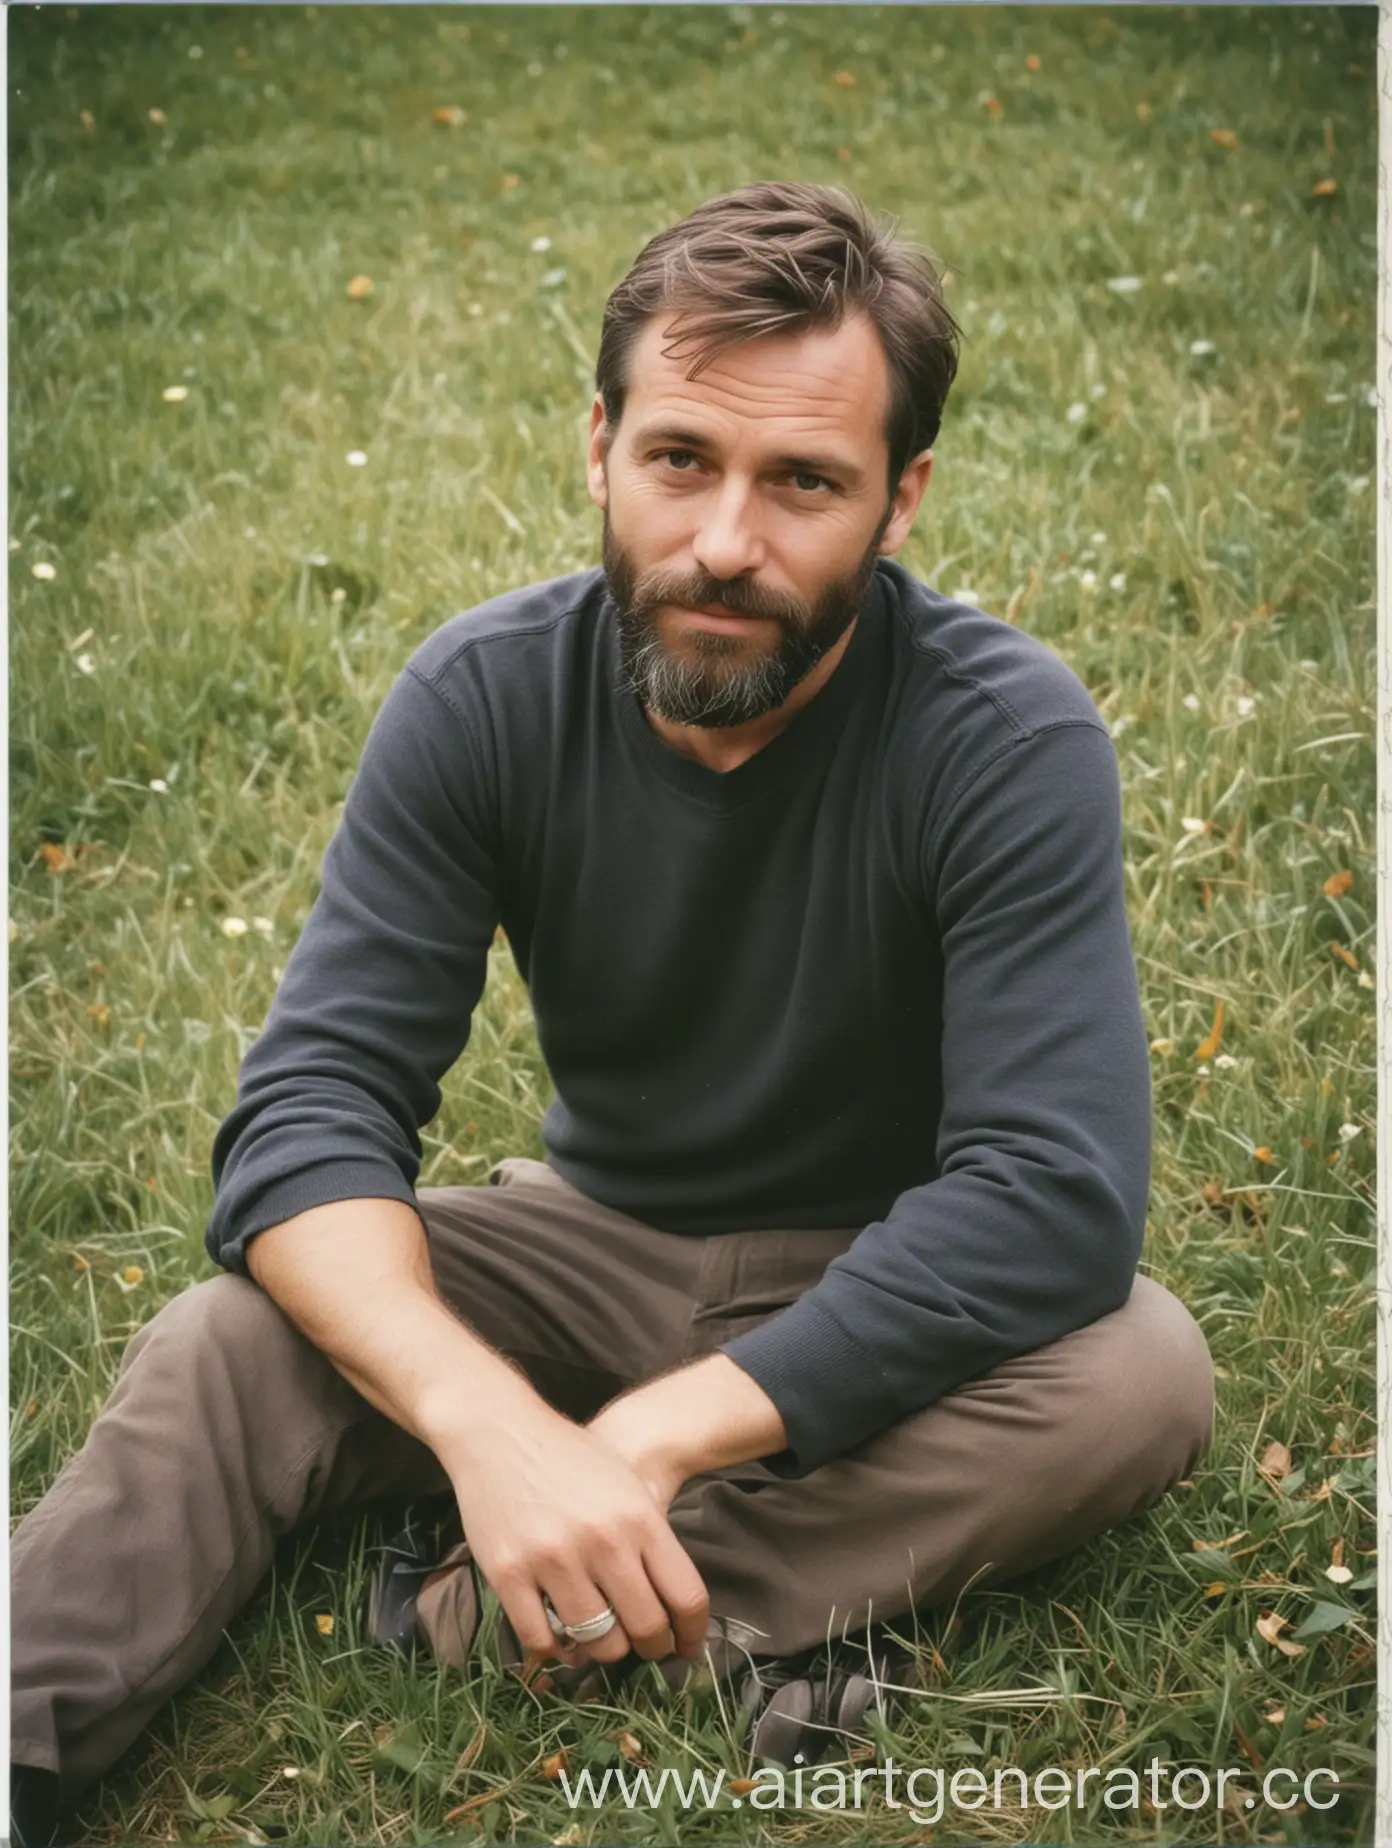 handsome short bearded man in his mid 40s, sitting on the grass, polaroid photo 1998 year